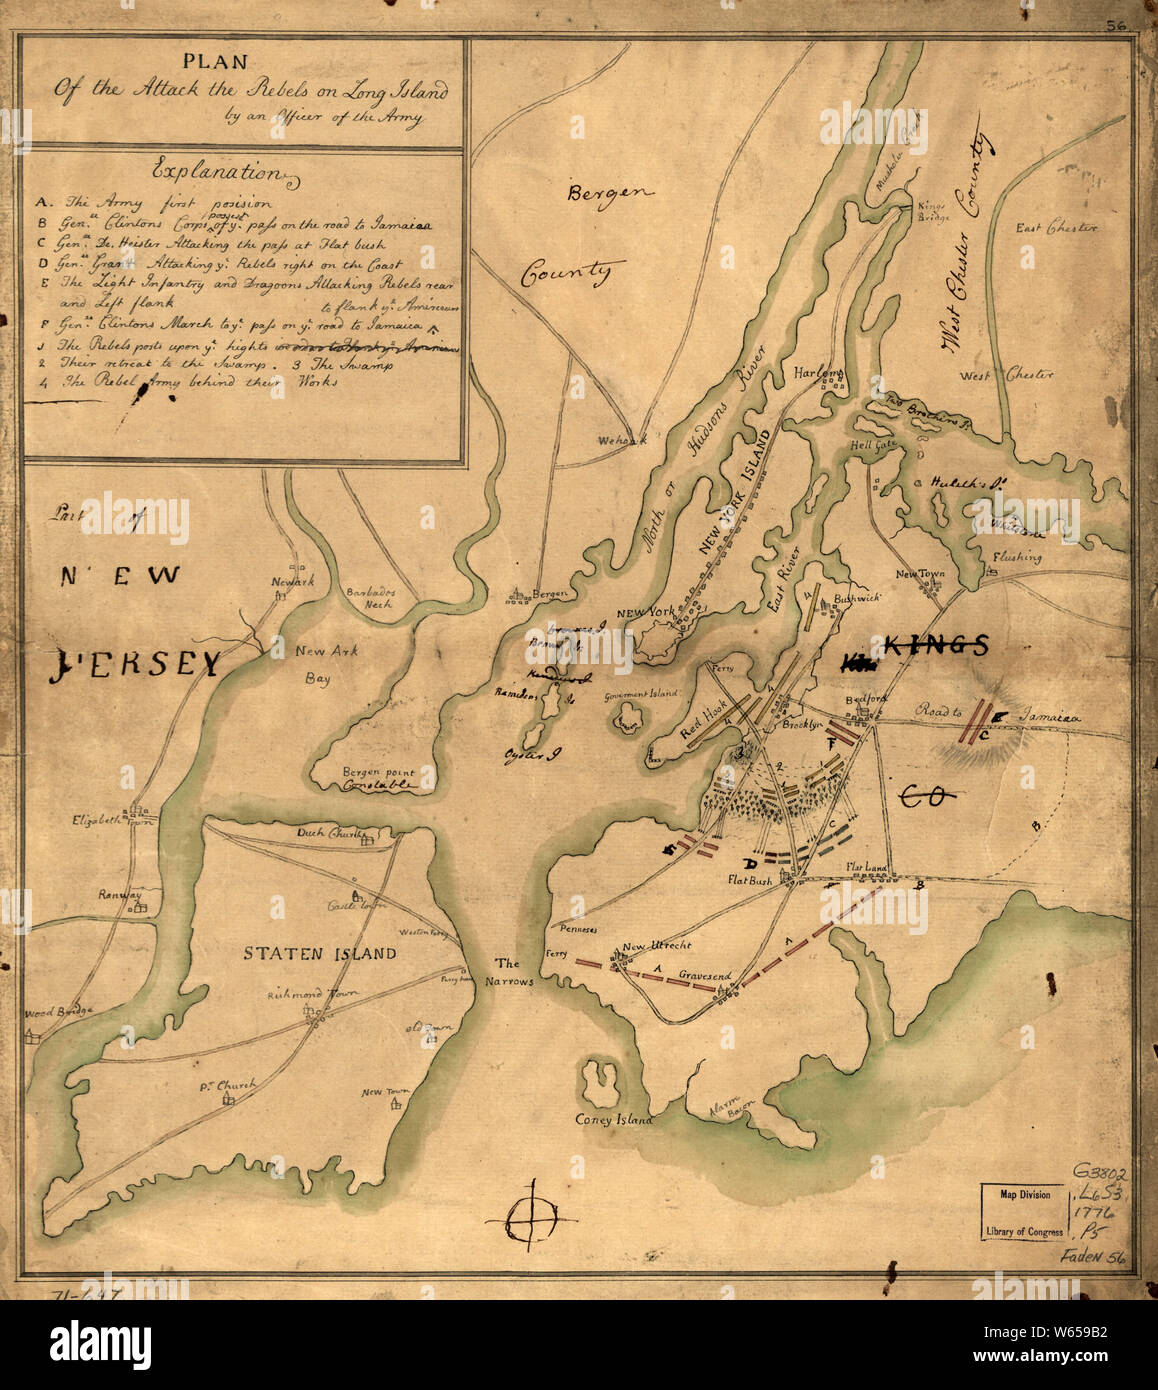 American Revolutionary War Era Maps 1750-1786 766 Plan of the attack the rebels on Long Island by an officer of the Army Rebuild and Repair Stock Photo